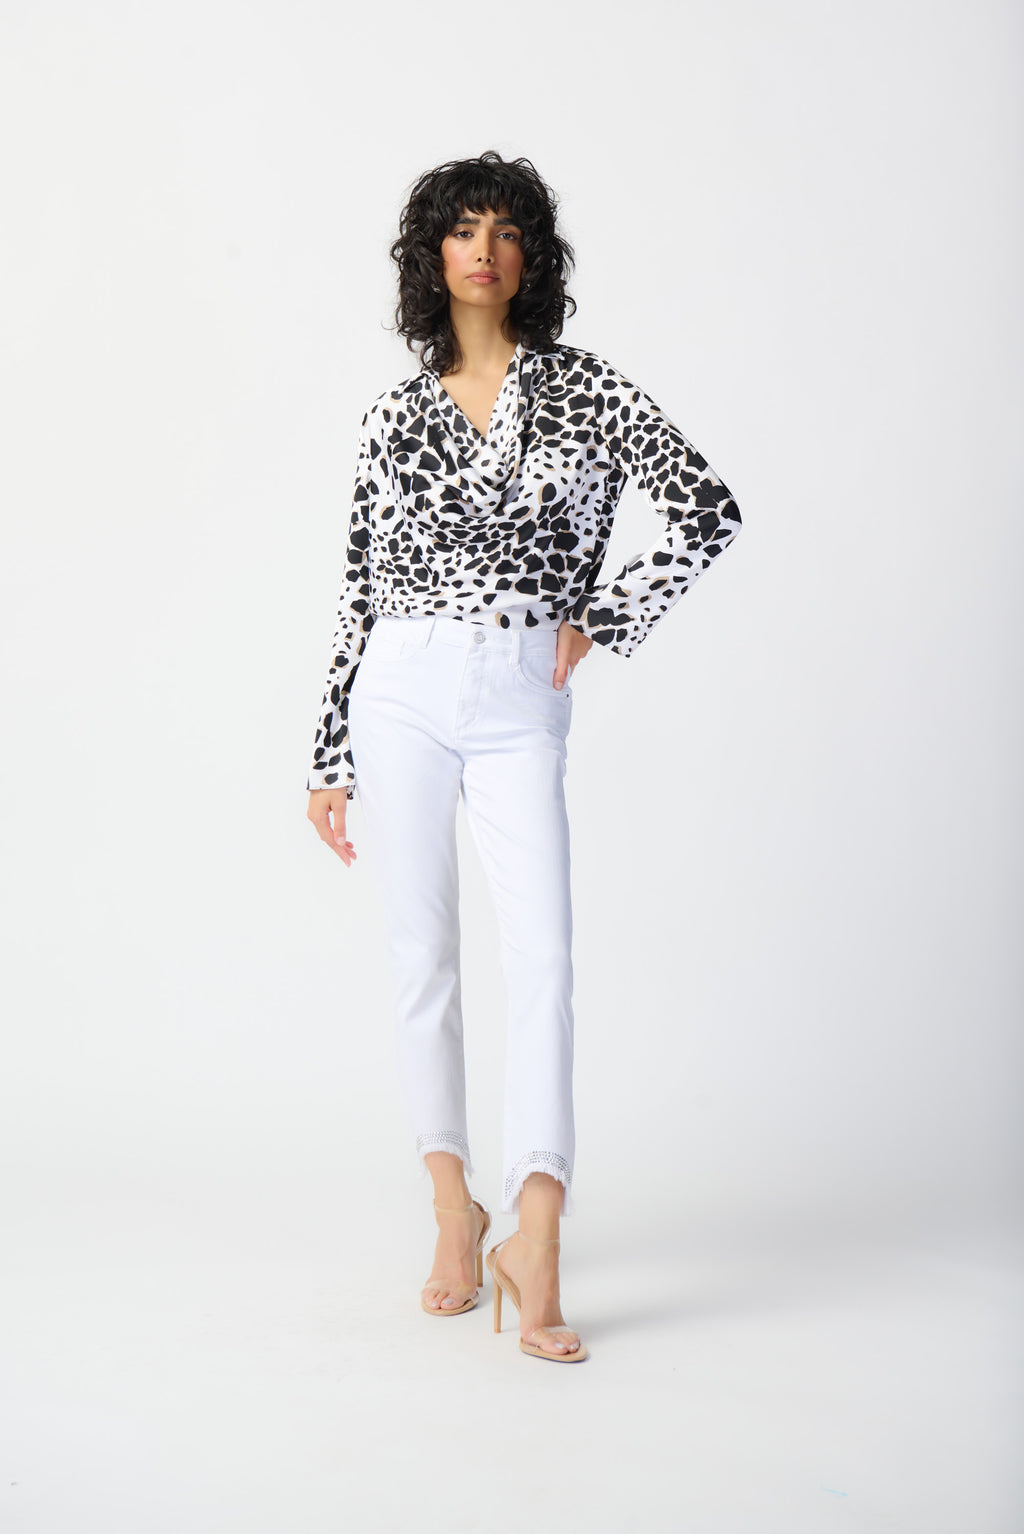 This elegant satin top is crafted from a smooth satin adorned with a subtle animal print. Its straight silhouette is universally flattering, while a cowl neckline with a shirt collar adds a bold touch to this memorable statement piece.